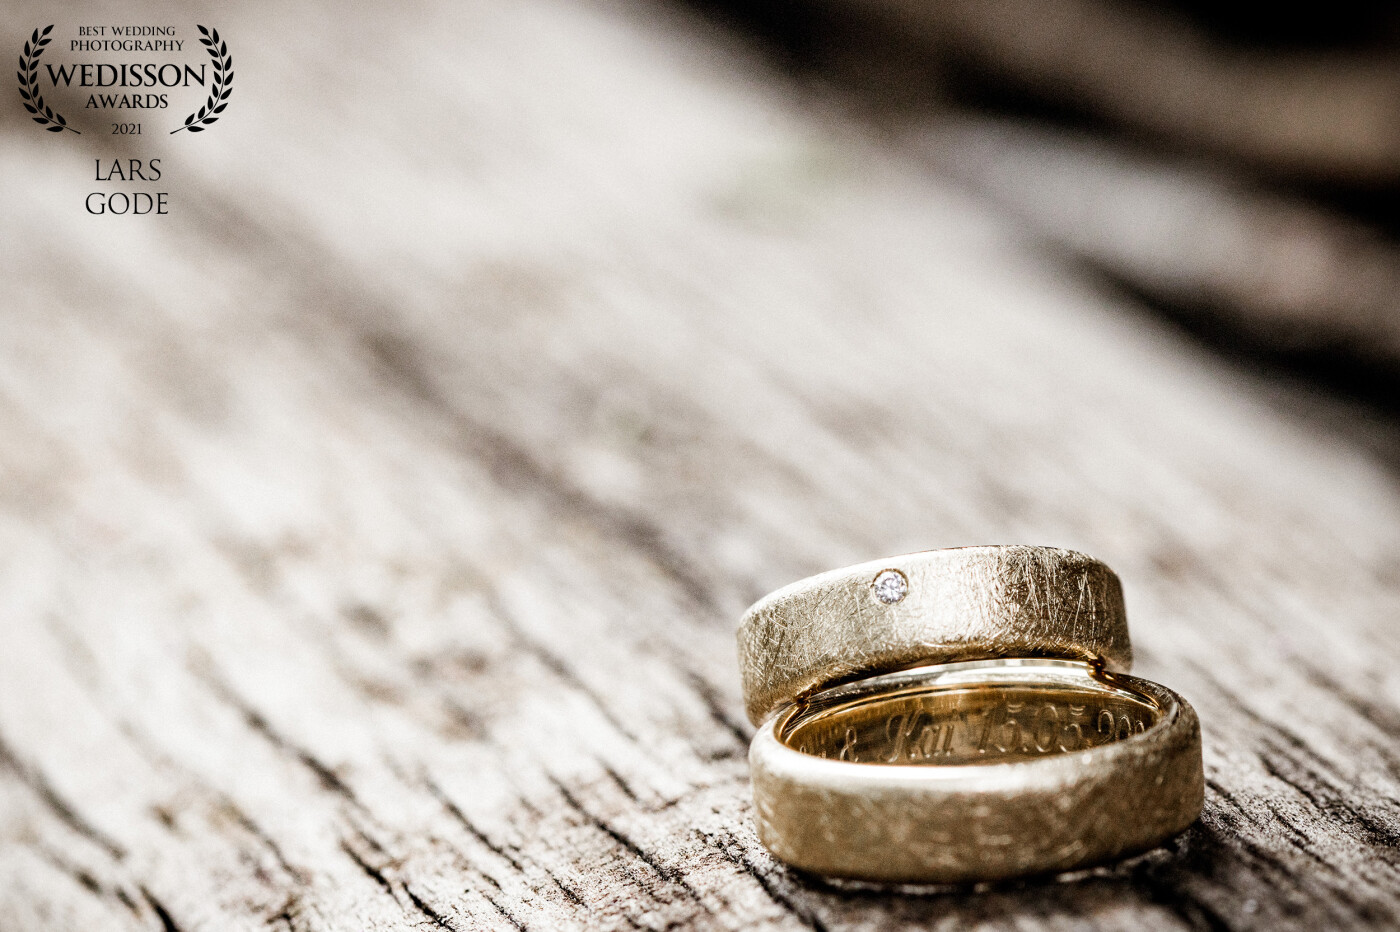 Rings as a sign of infinity always have a special meaning on the wedding day. This small and yet so important item simply deserves to be shown in the right light. I love the wedding photographer's ability to free up the time for a close inspection.